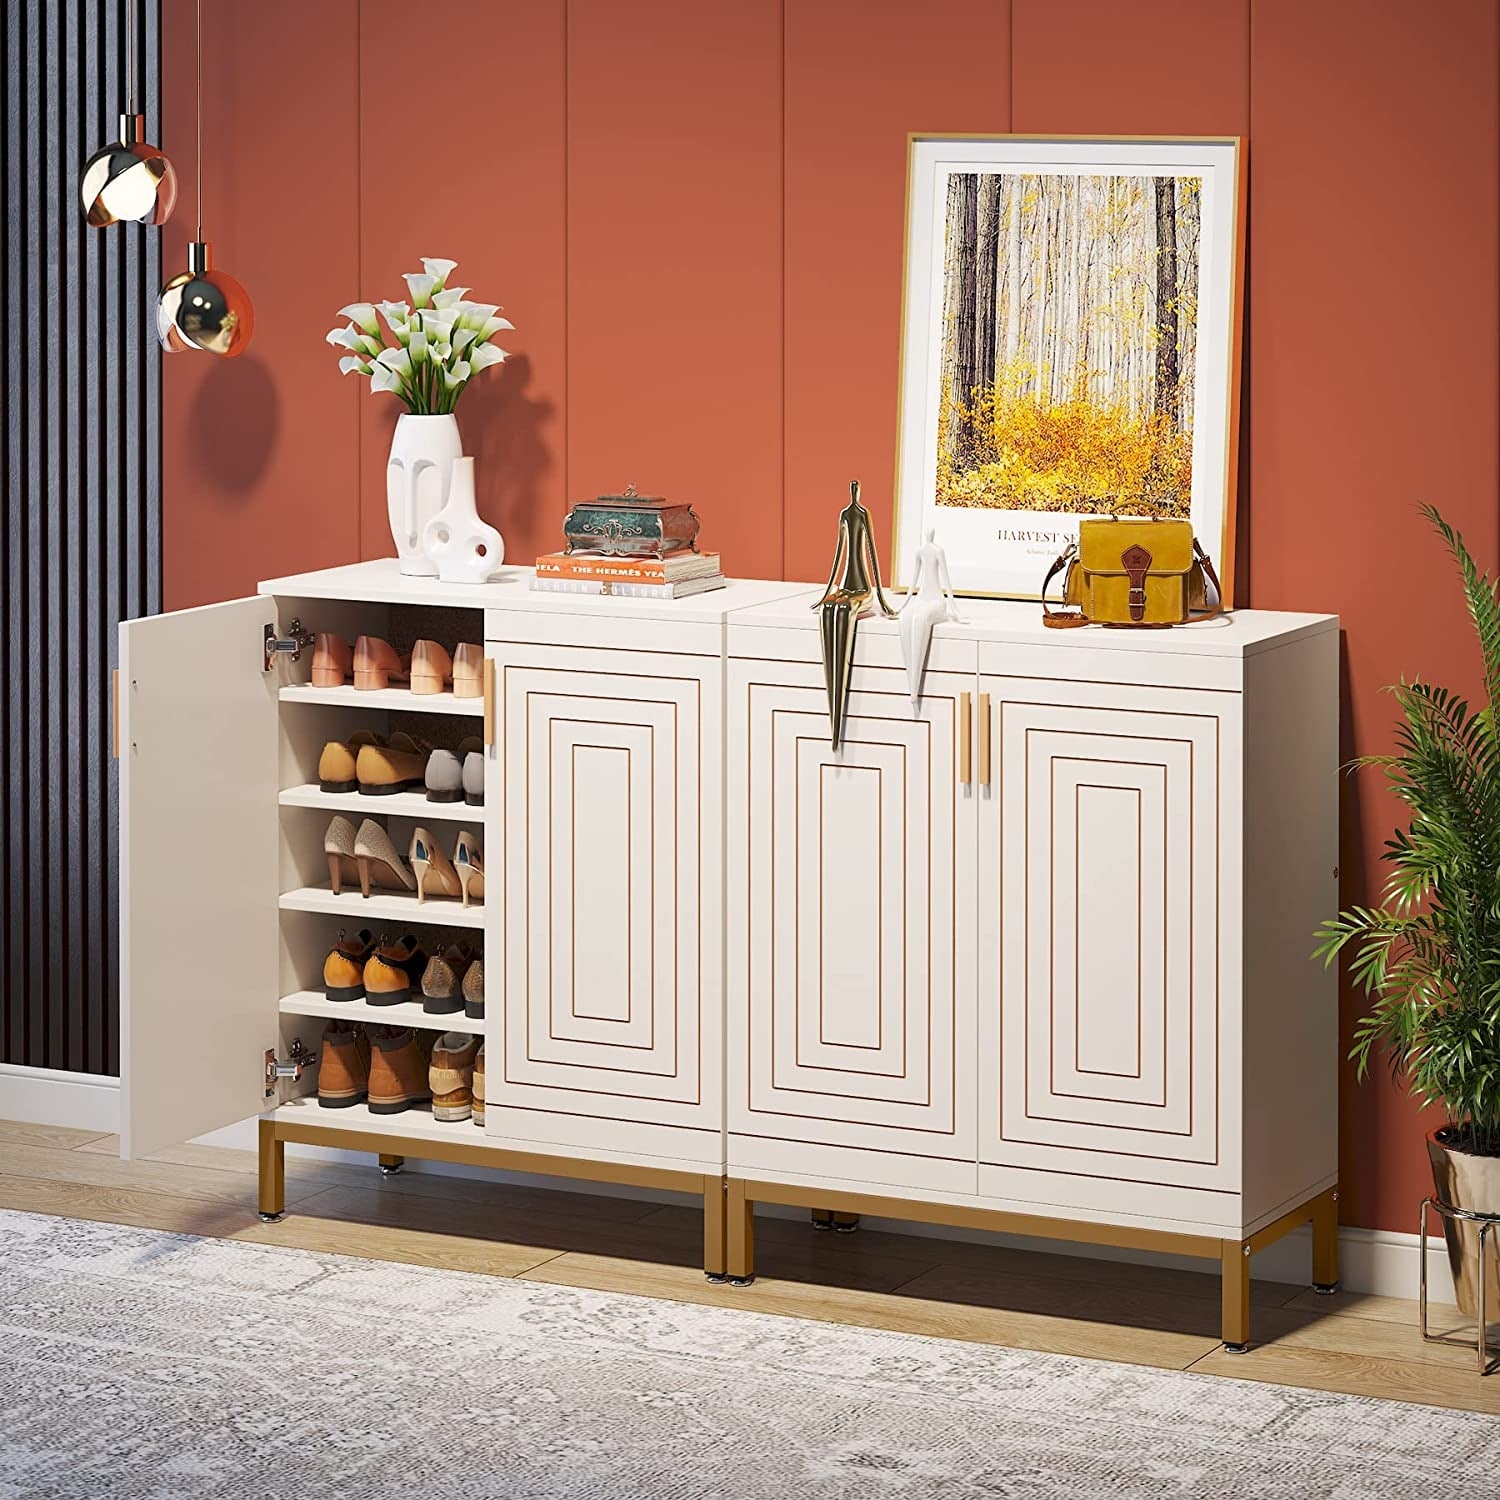 https://ak1.ostkcdn.com/images/products/is/images/direct/a500c3cc5083233f262810ad517e429ea2b0f5d3/20-Pairs-Shoe-Storage-Cabinet-for-Entryway%2C-Freestanding-Shoe-Rack-Organizer.jpg